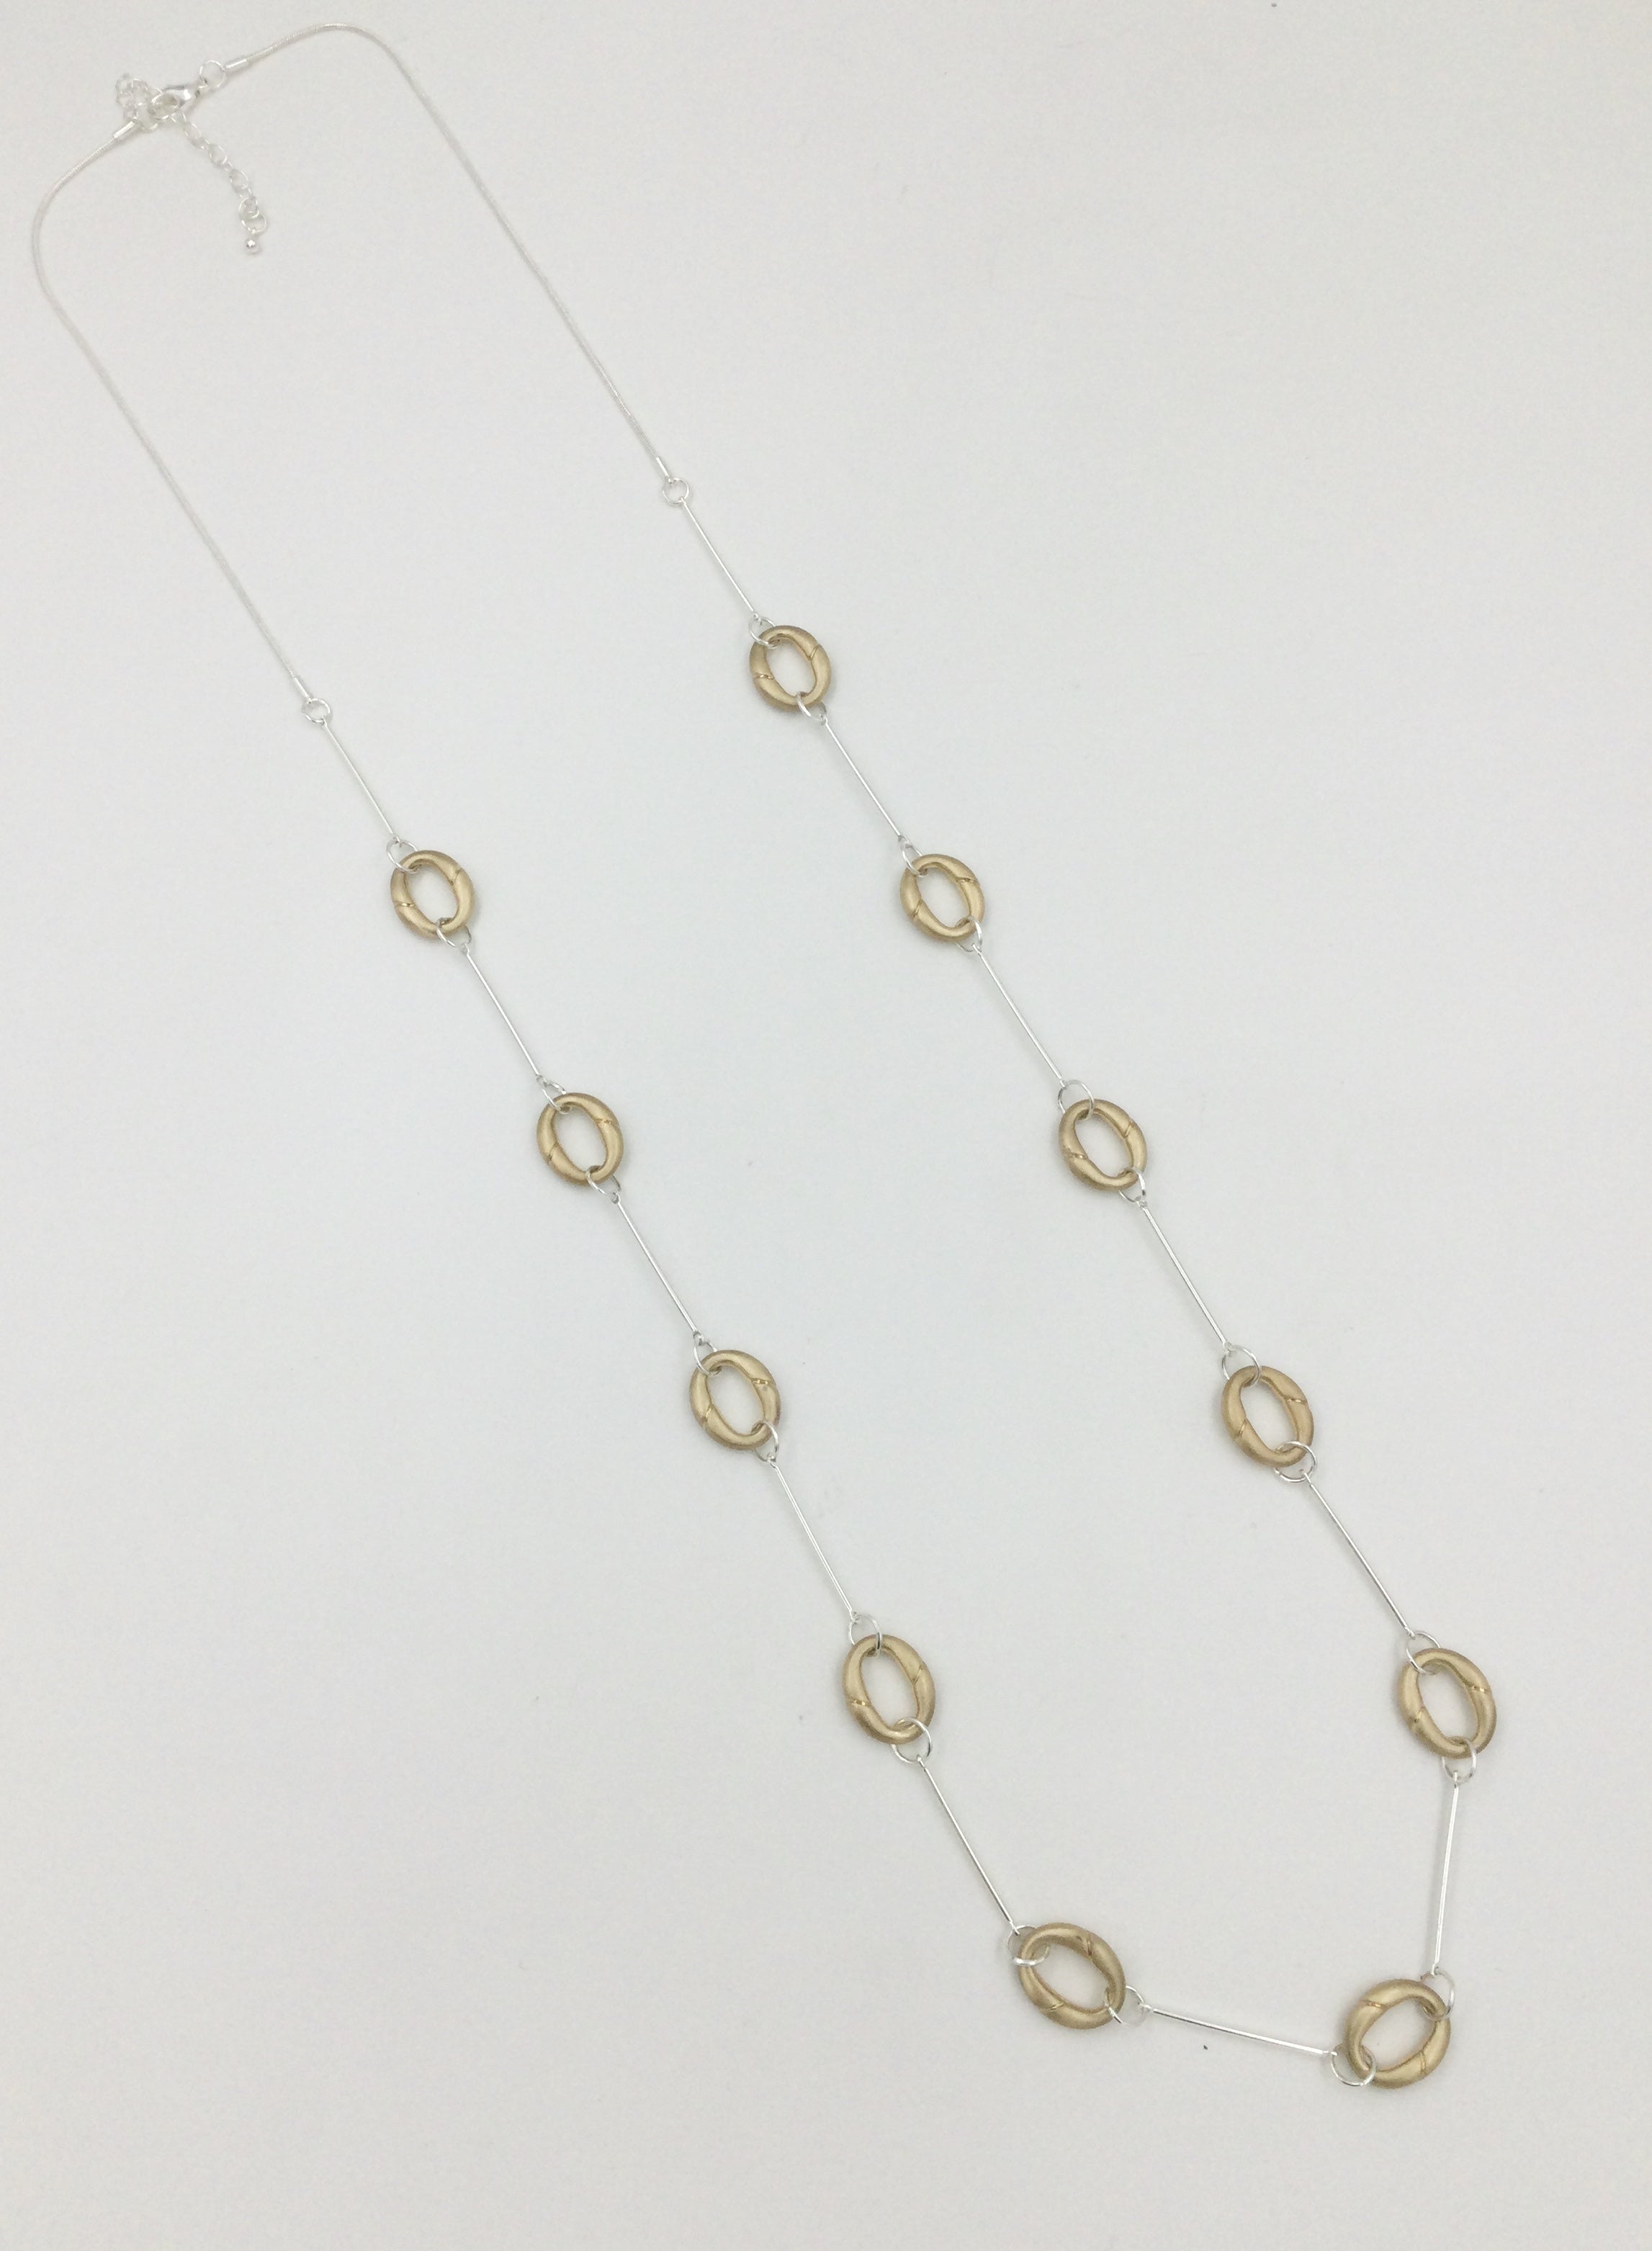 Long necklace, with interlinked matte gold open-circular stations - on a silver chain